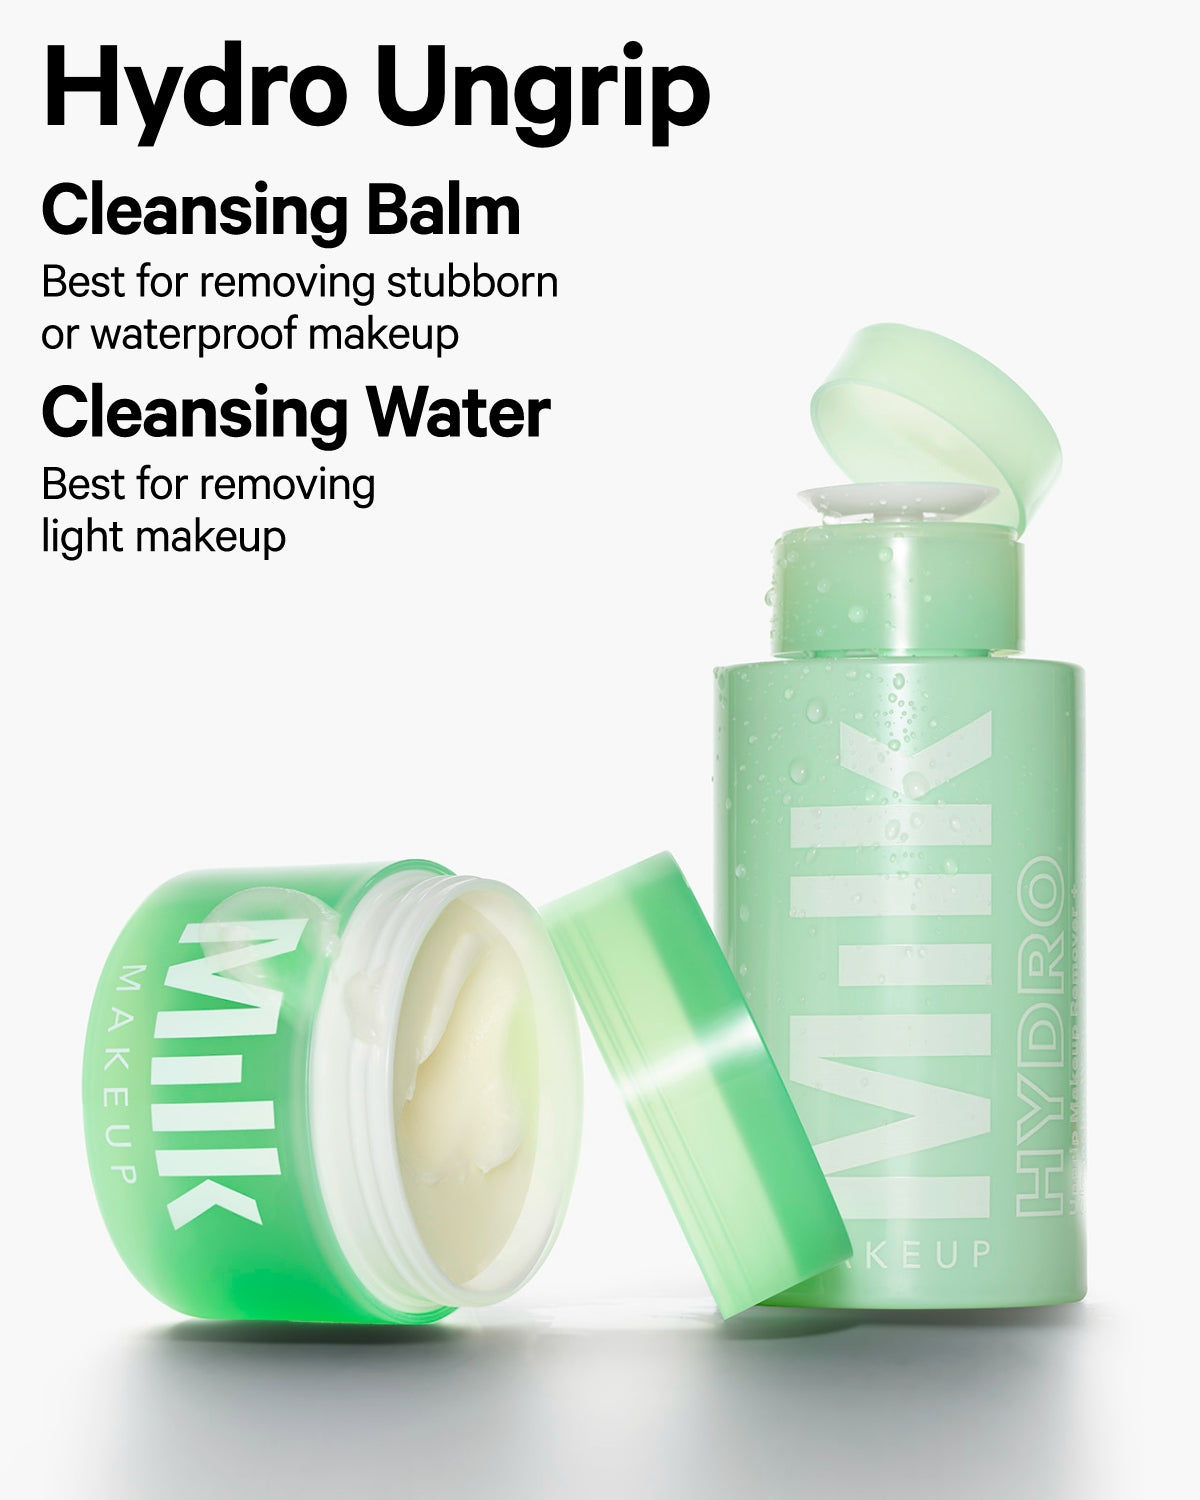 Hydro Ungrip Makeup Removing Cleansing Balm Family | Milk Makeup